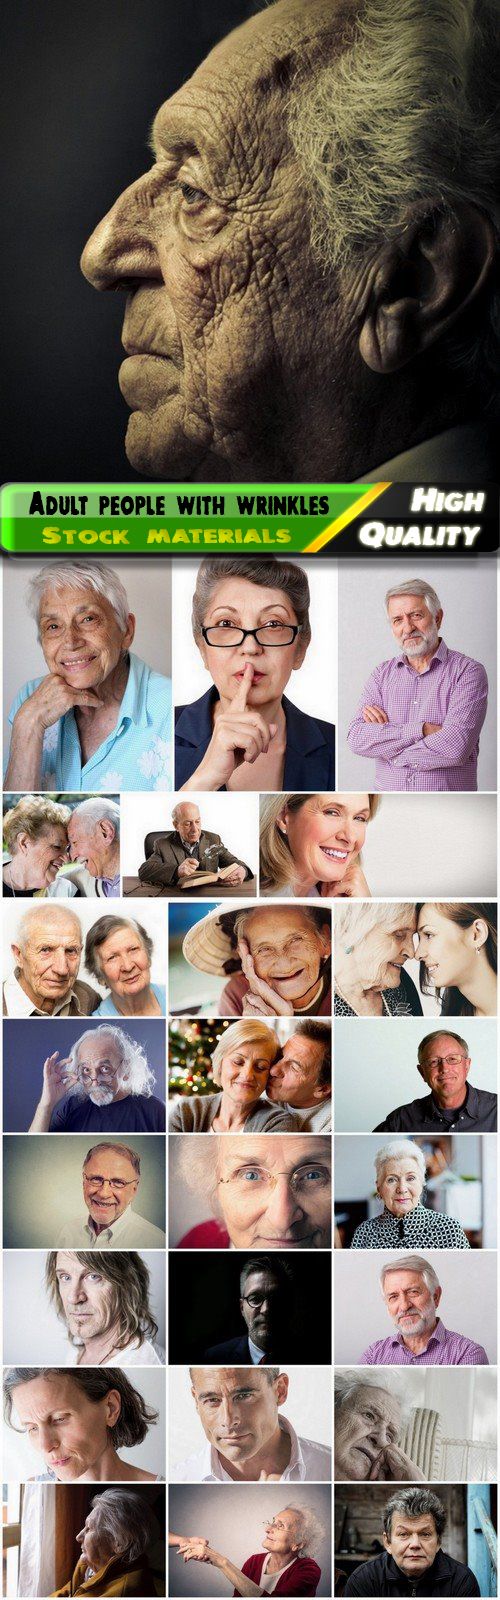 Adult people and seniors with wrinkles 25 HQ Jpg